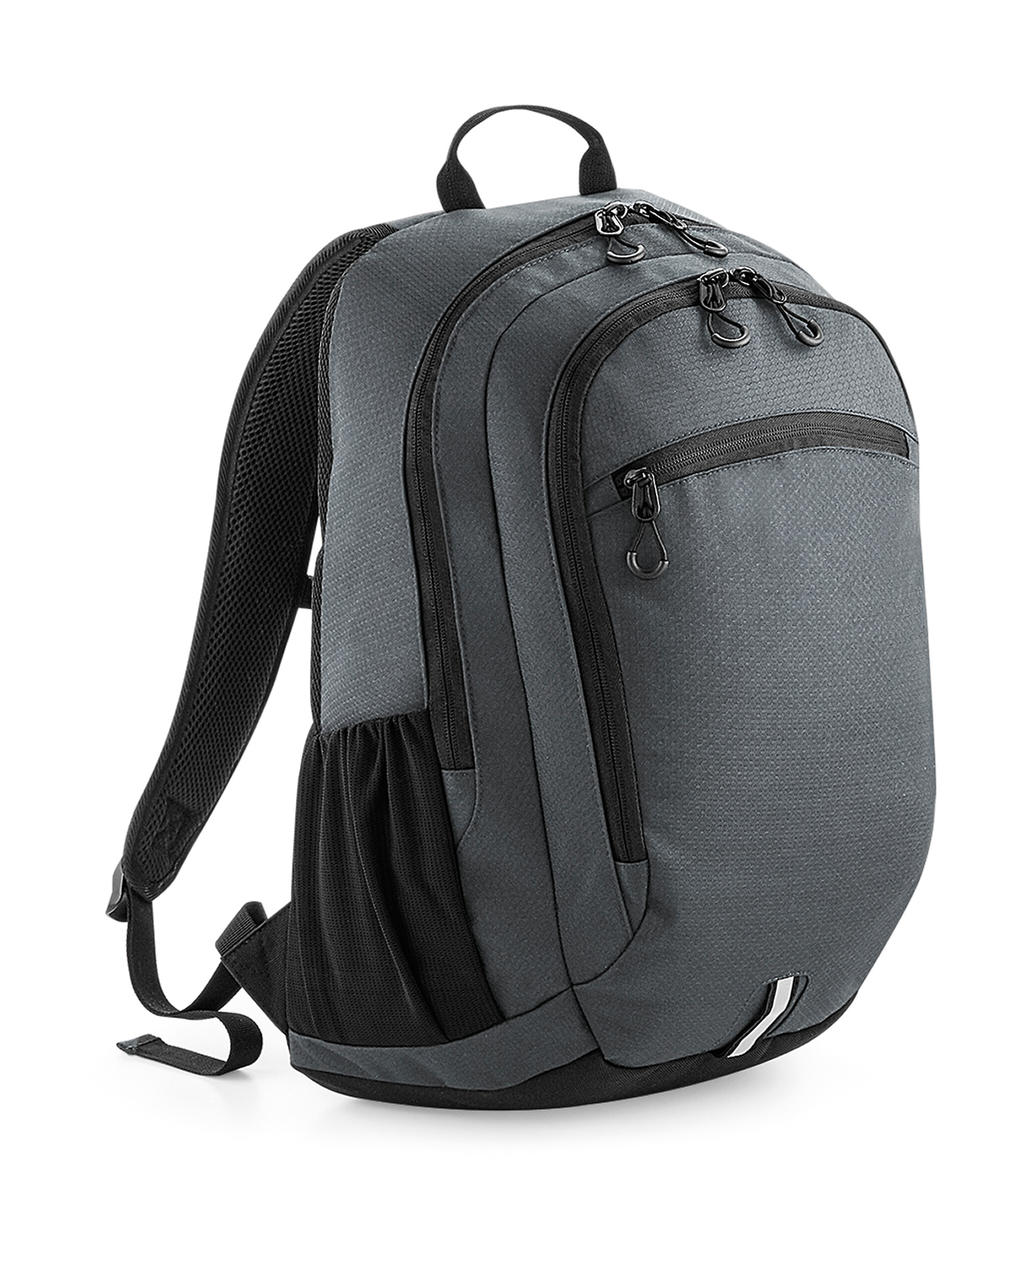  Endeavour Backpack in Farbe Graphite Grey